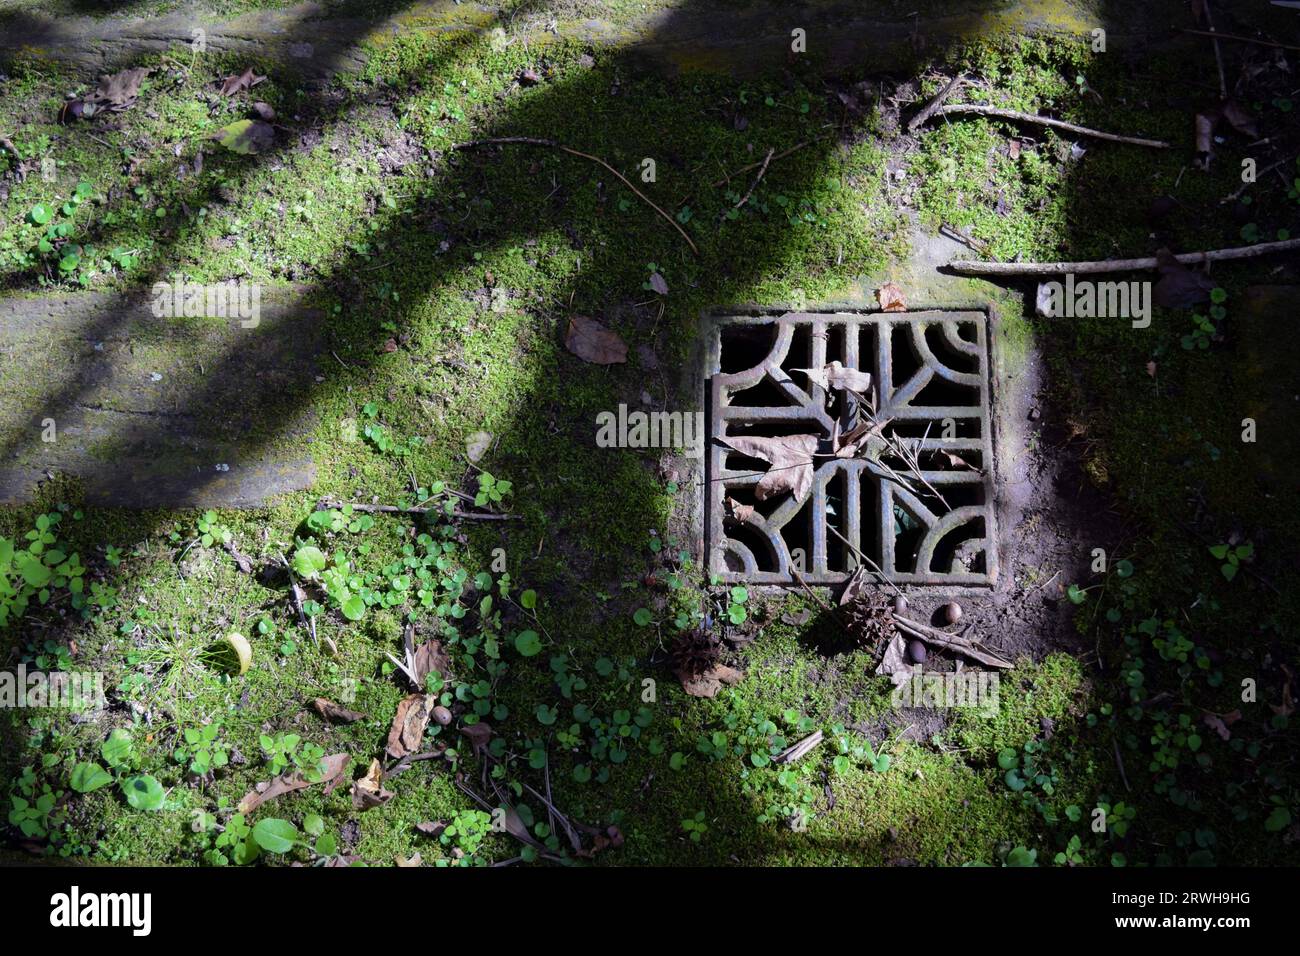 Storm drain grate in the garden Stock Photo